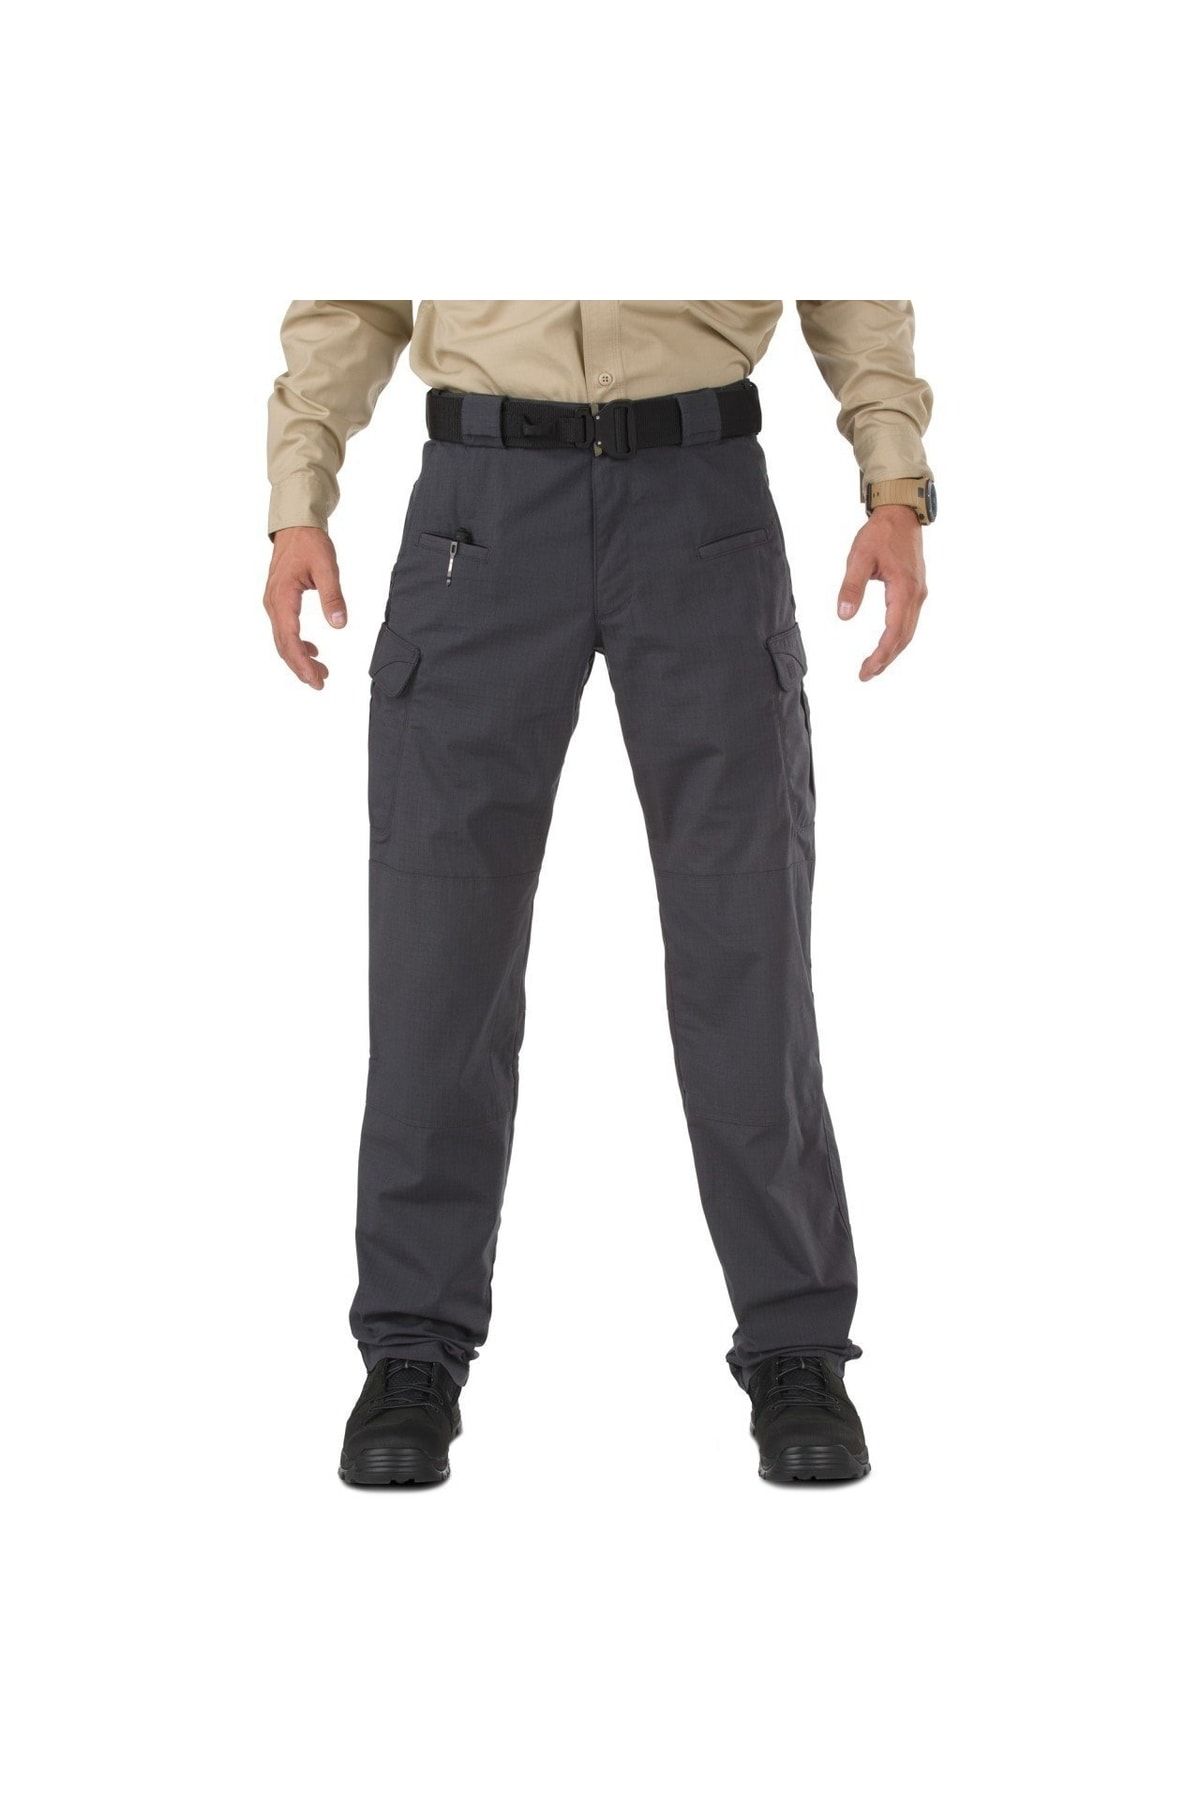 5.11 Tactical Trousers Charcoal TACLITE Pro Pants - Police Supplies